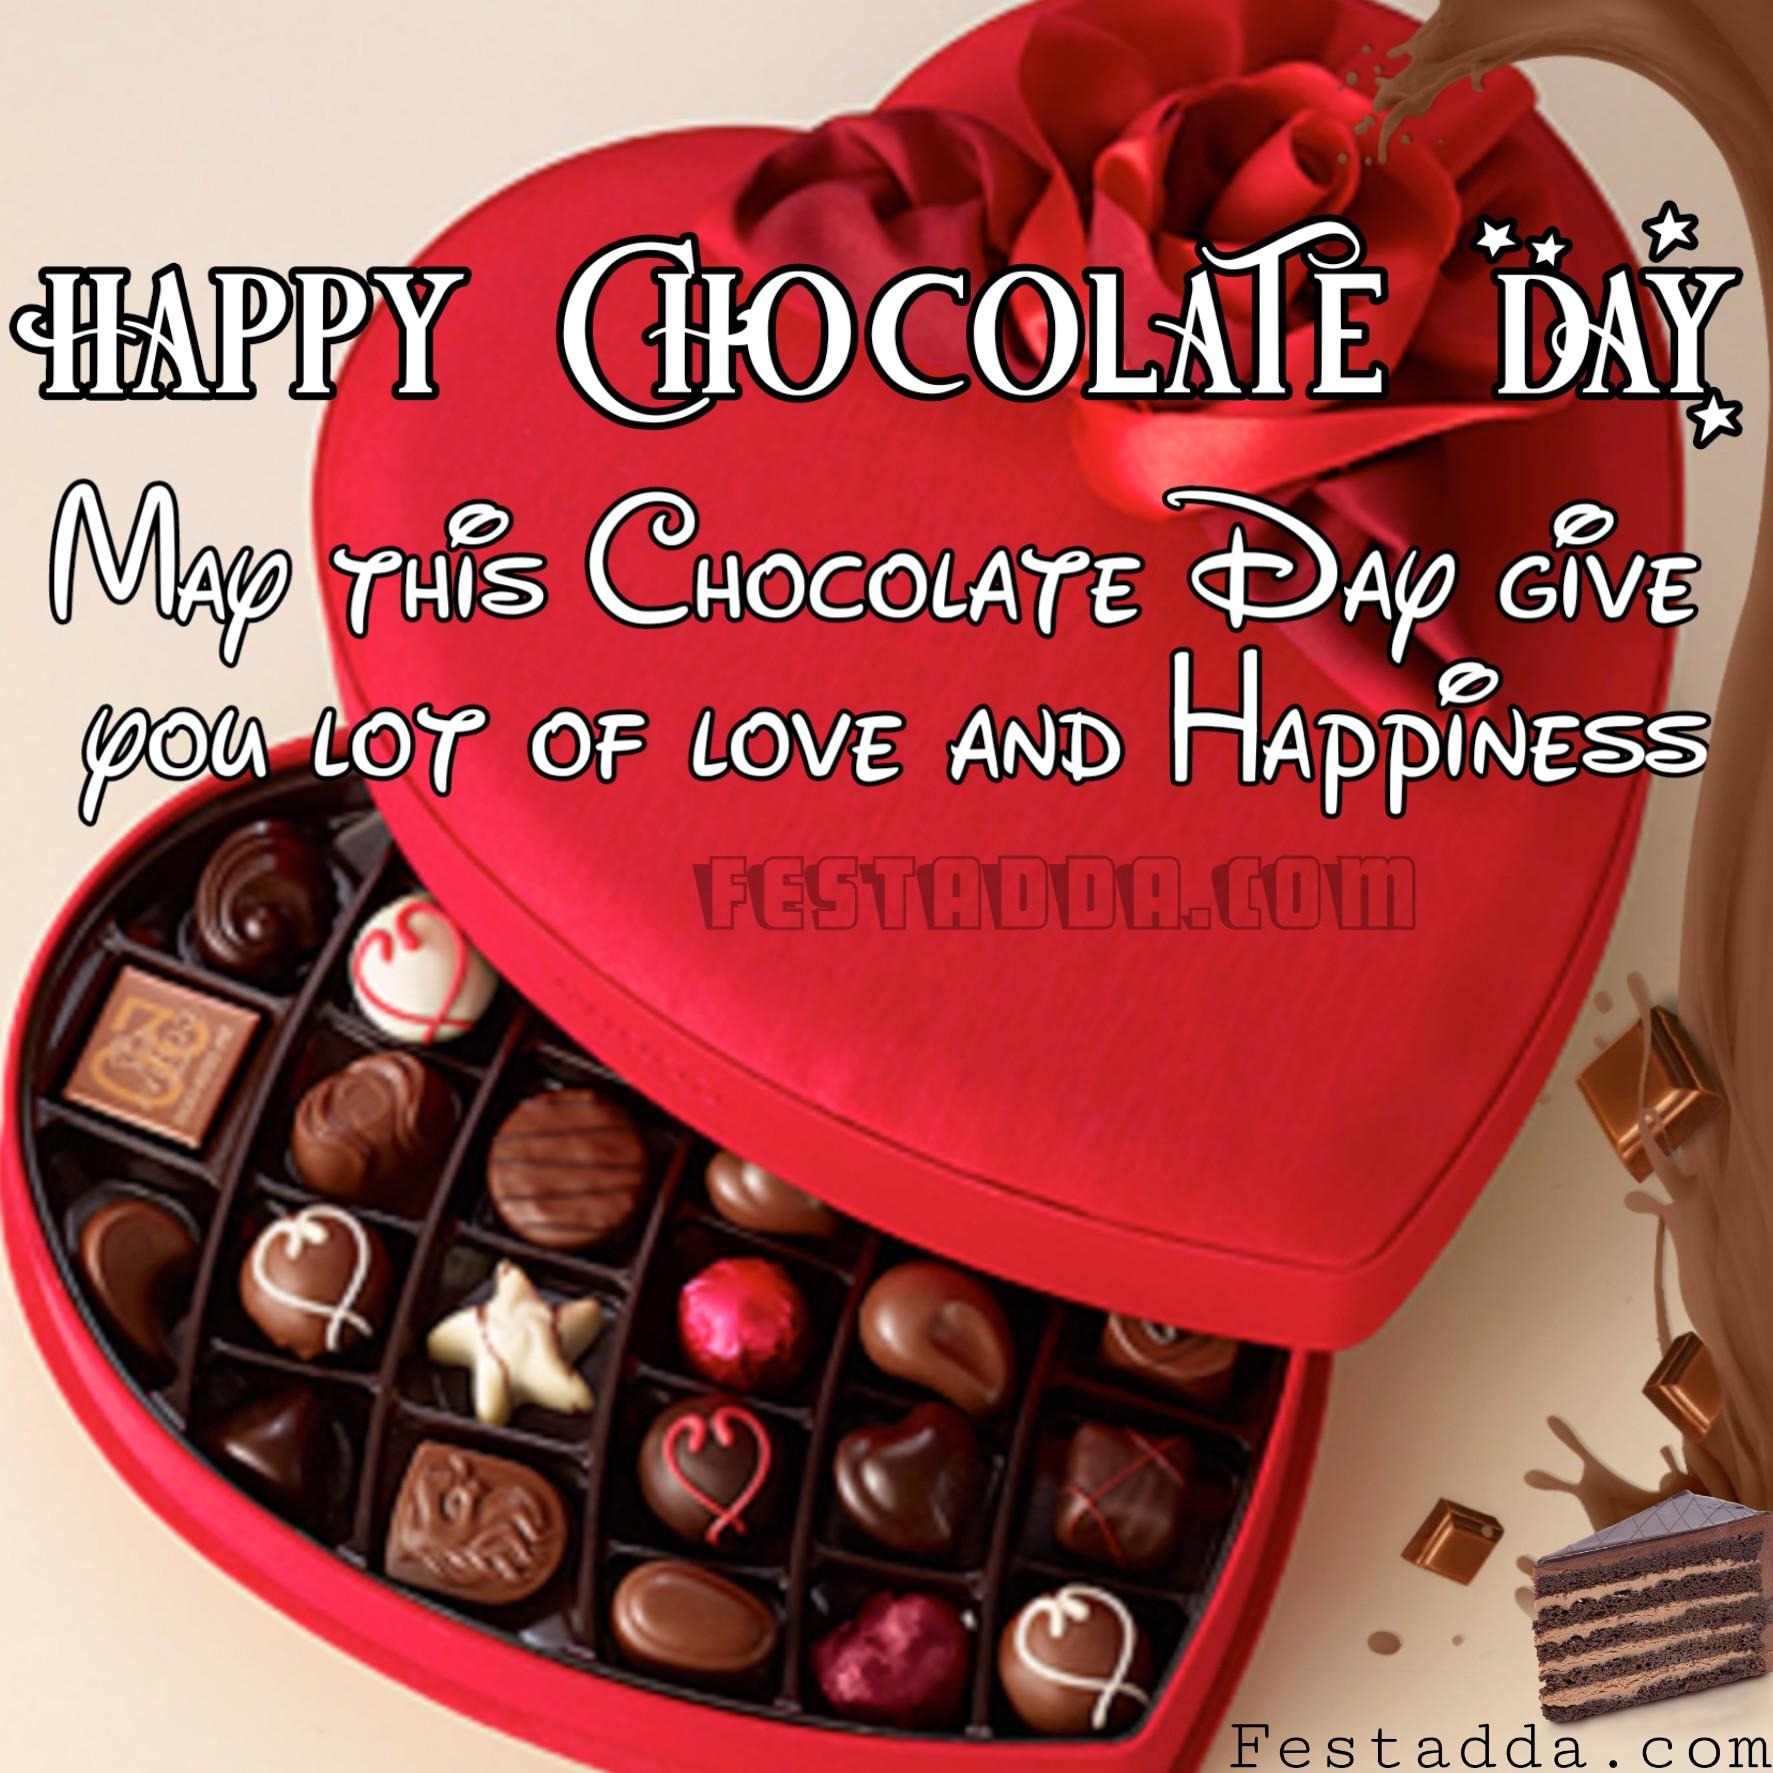 Happy Chocolate Day 2019 Image Day Image Download